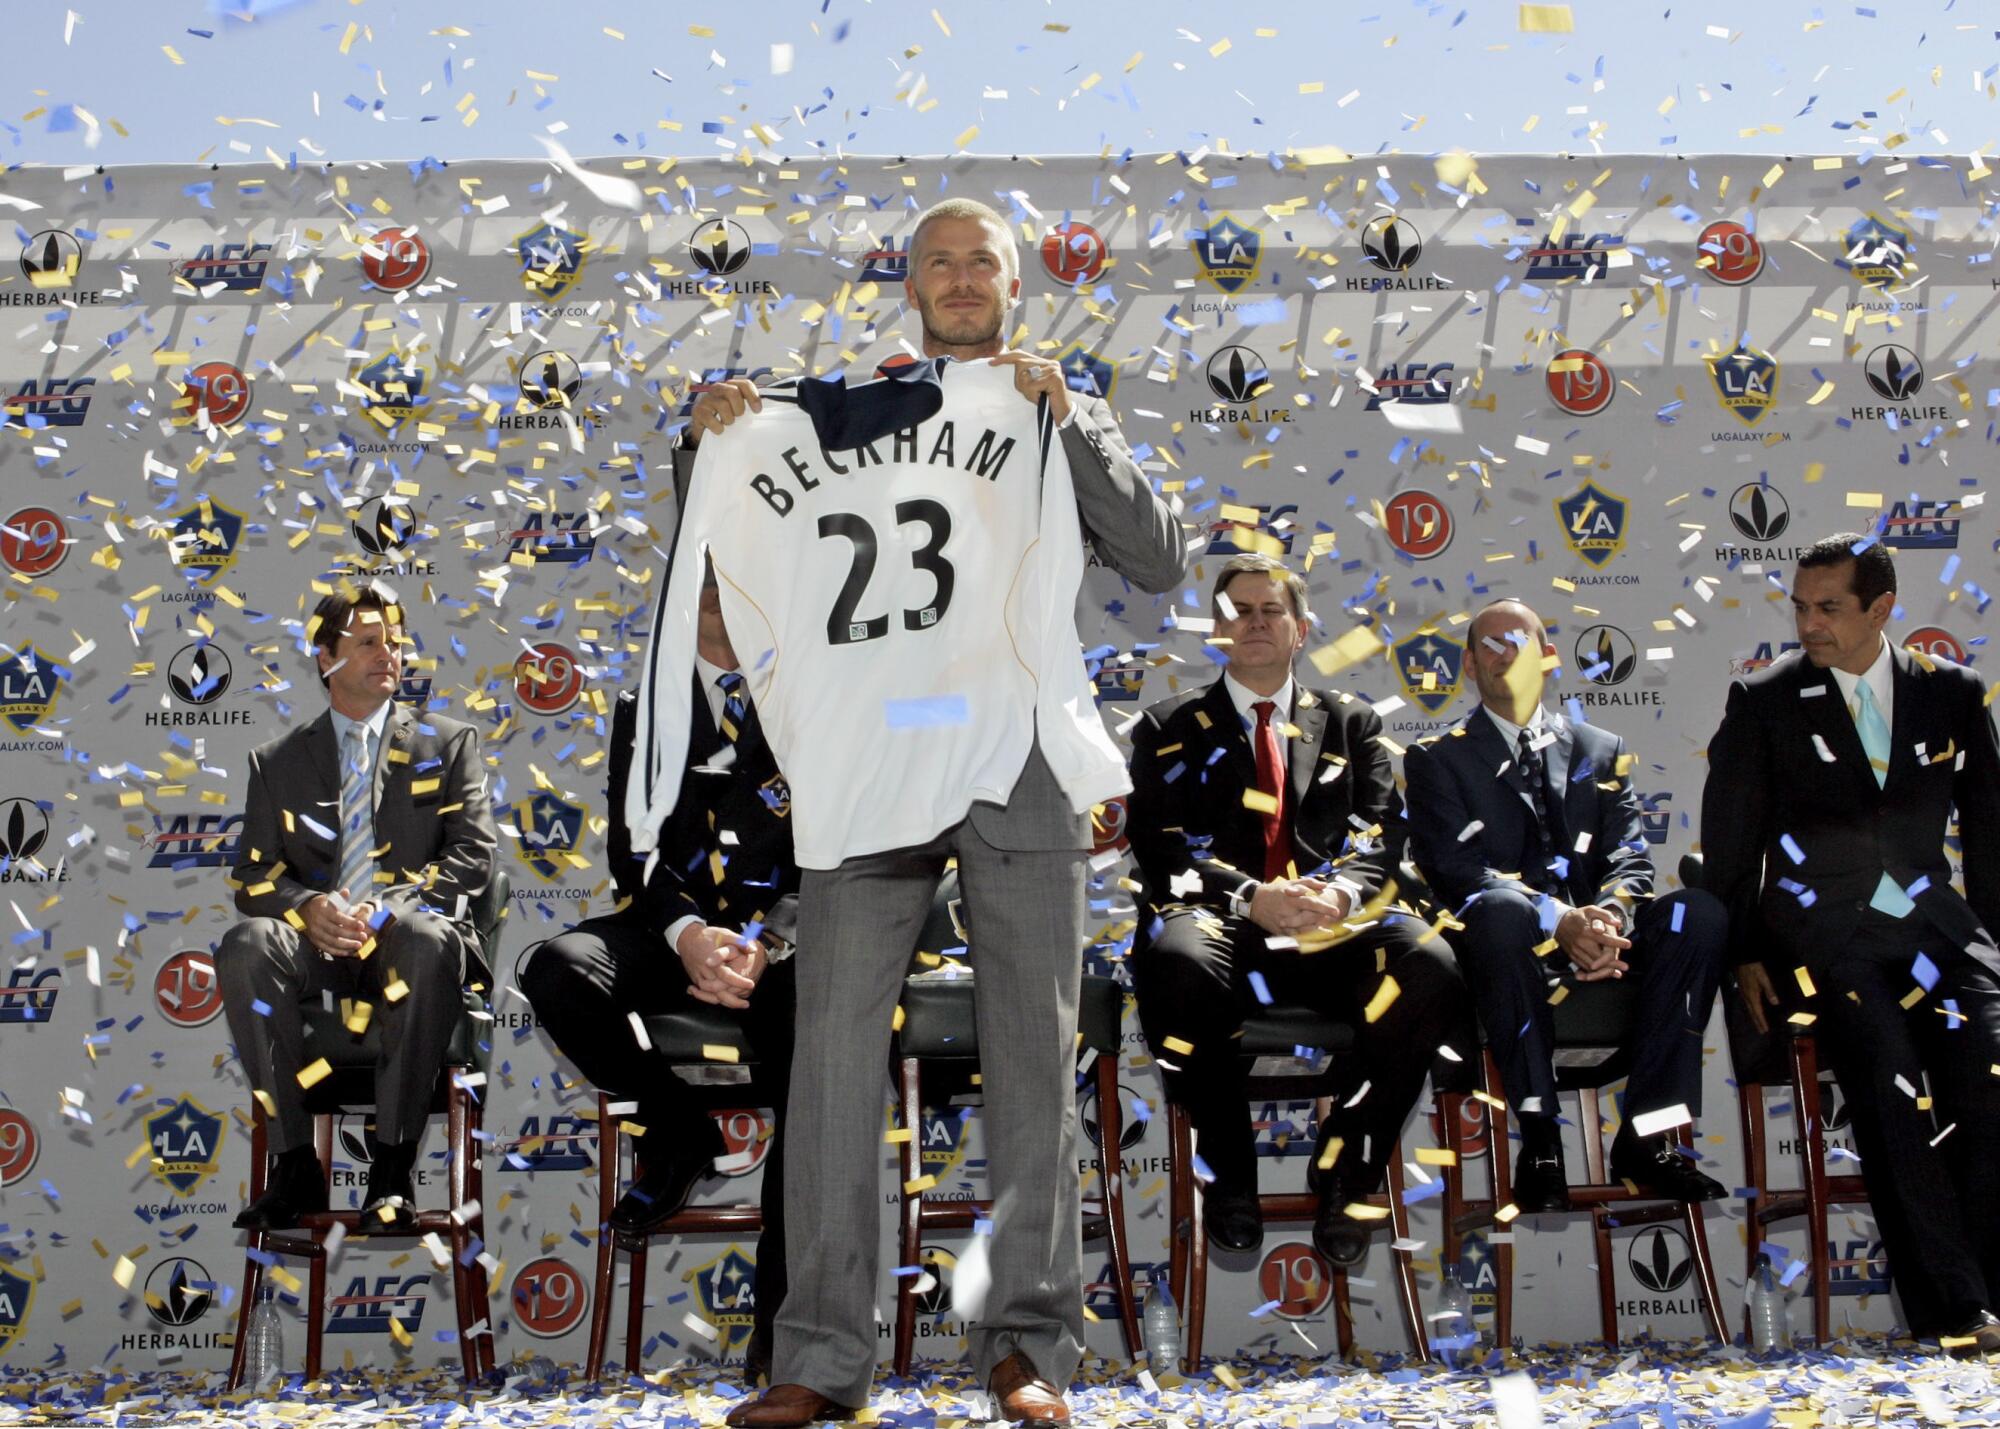 David Beckham holds up his new jersey while confetti falls.